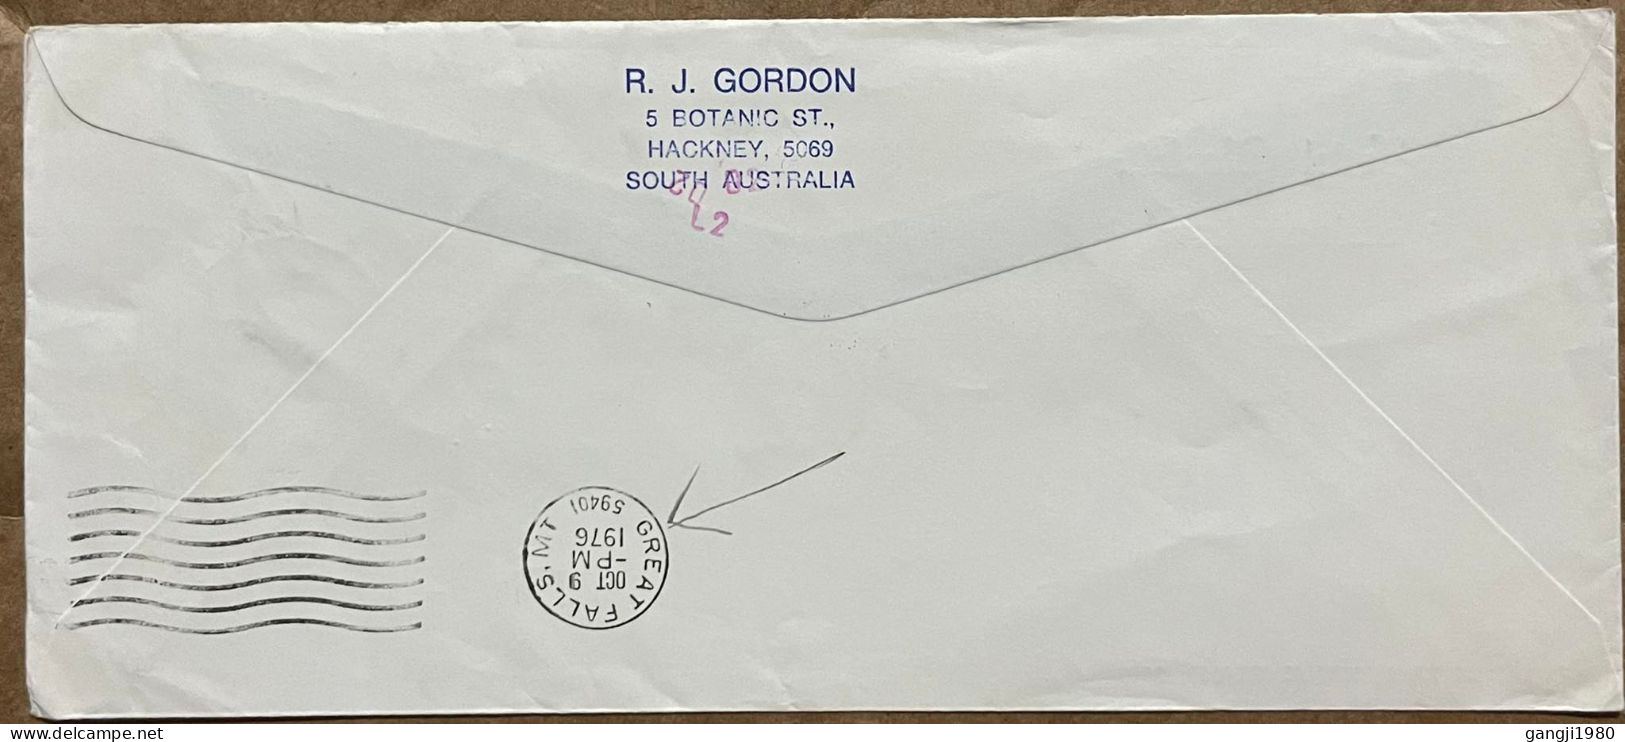 AUSTRALIA 1976, HOTEL NORFOLK ADVERTISING COVER, USED TO USA, PIONEER FOOD, BROKEN BAY, OLYMPIC GAME DIVING, 4 STAMP, RU - Lettres & Documents